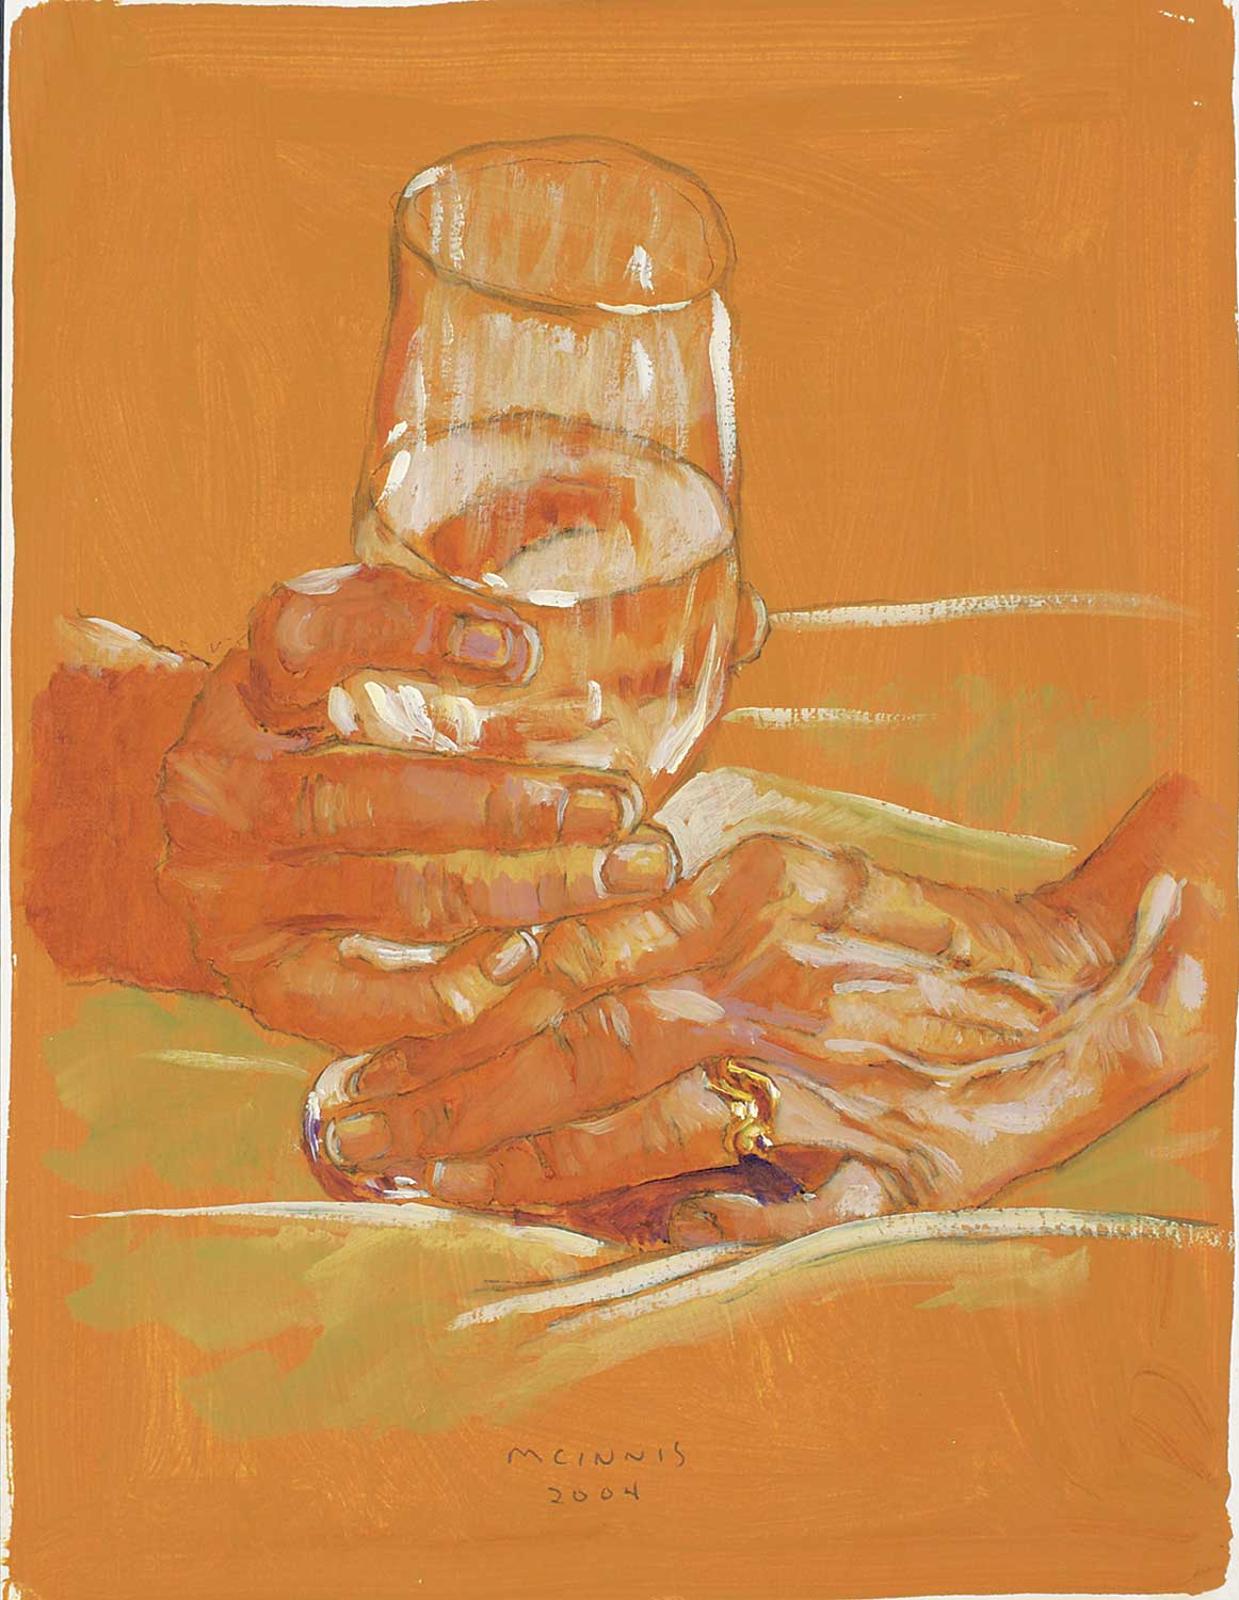 Robert F.M. McInnis (1942) - Untitled - Hands and Glass